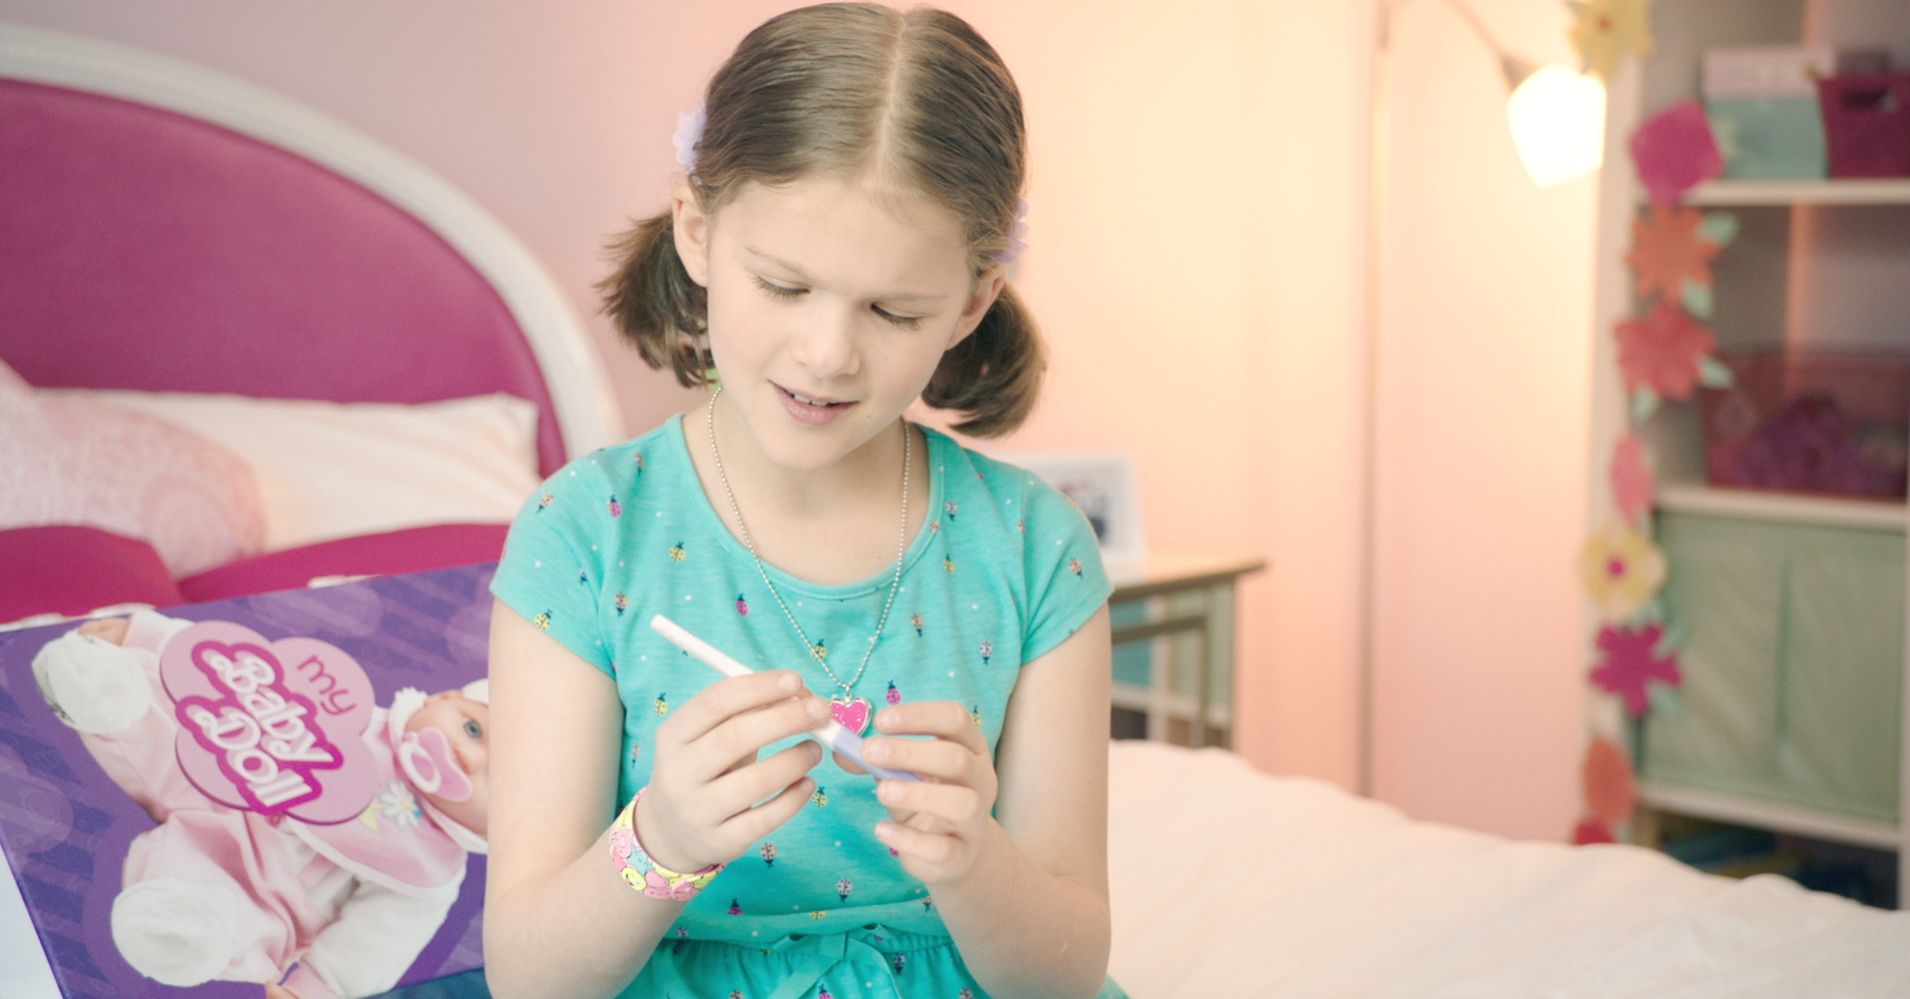 Why This Girl Opened A New Toy And Found A Pregnancy Test Instead 4613